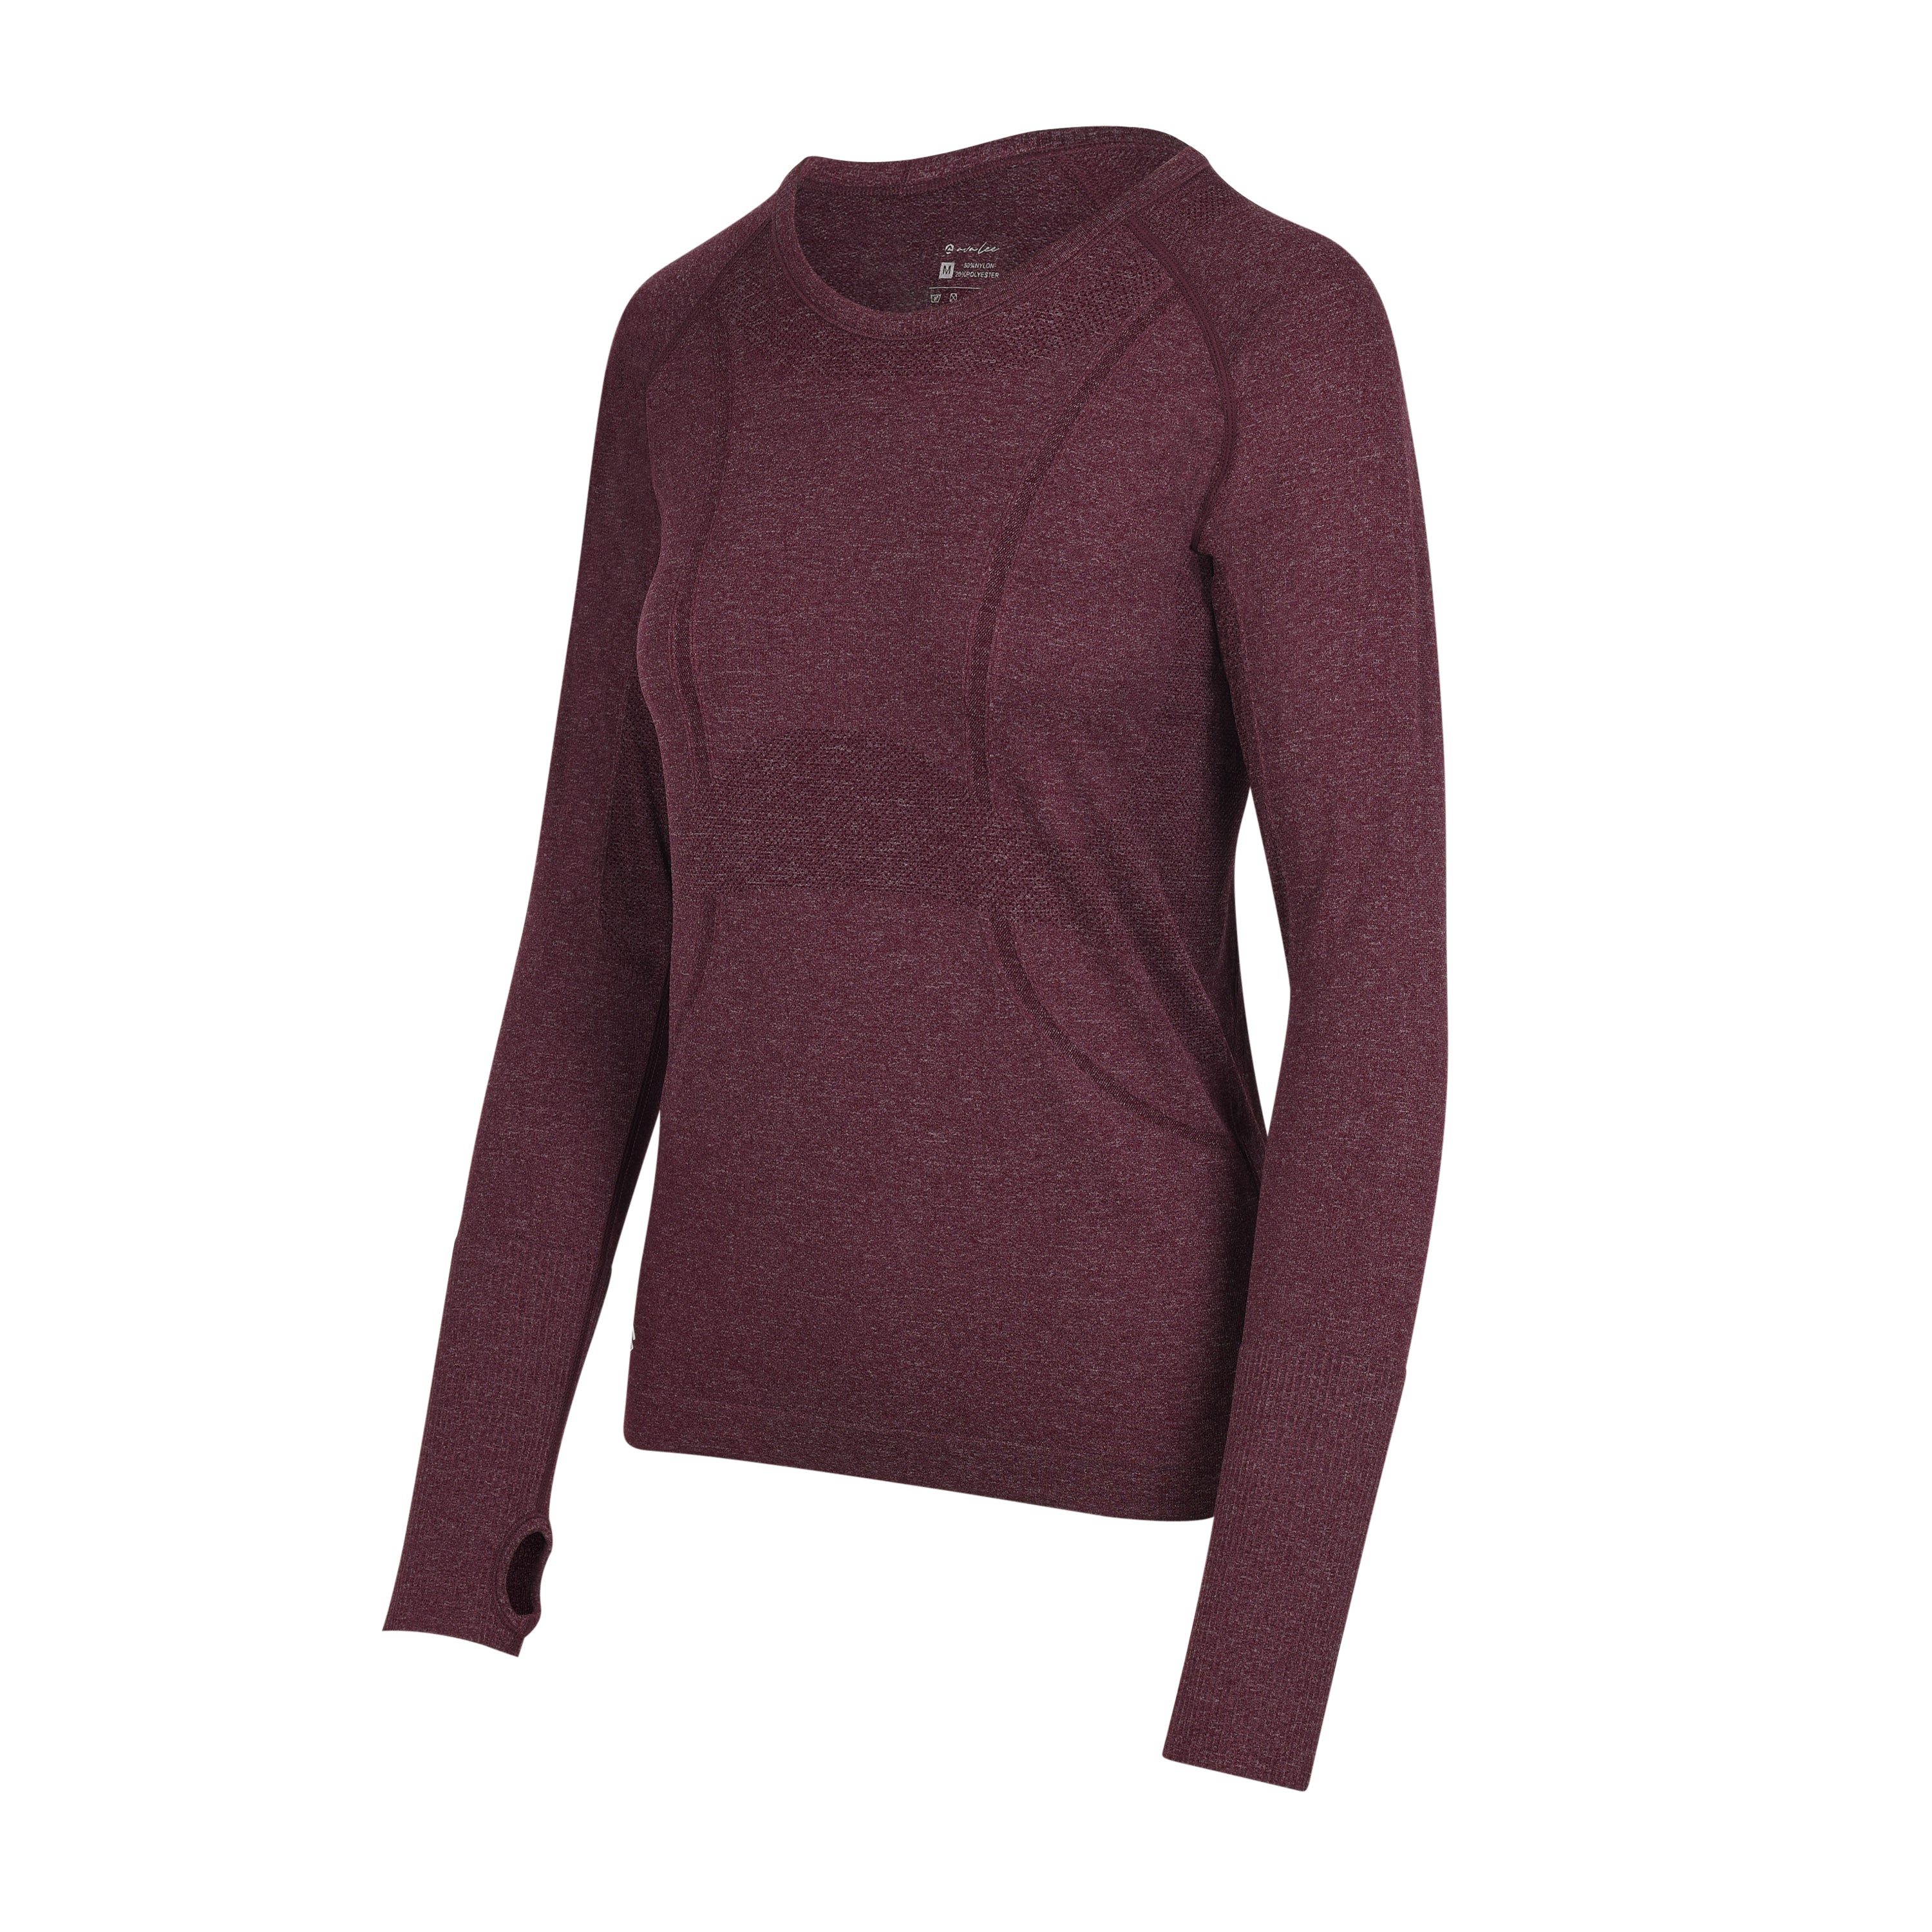 Mauve Heather AvaLee by Selkirk Women's Fitted Longsleeve